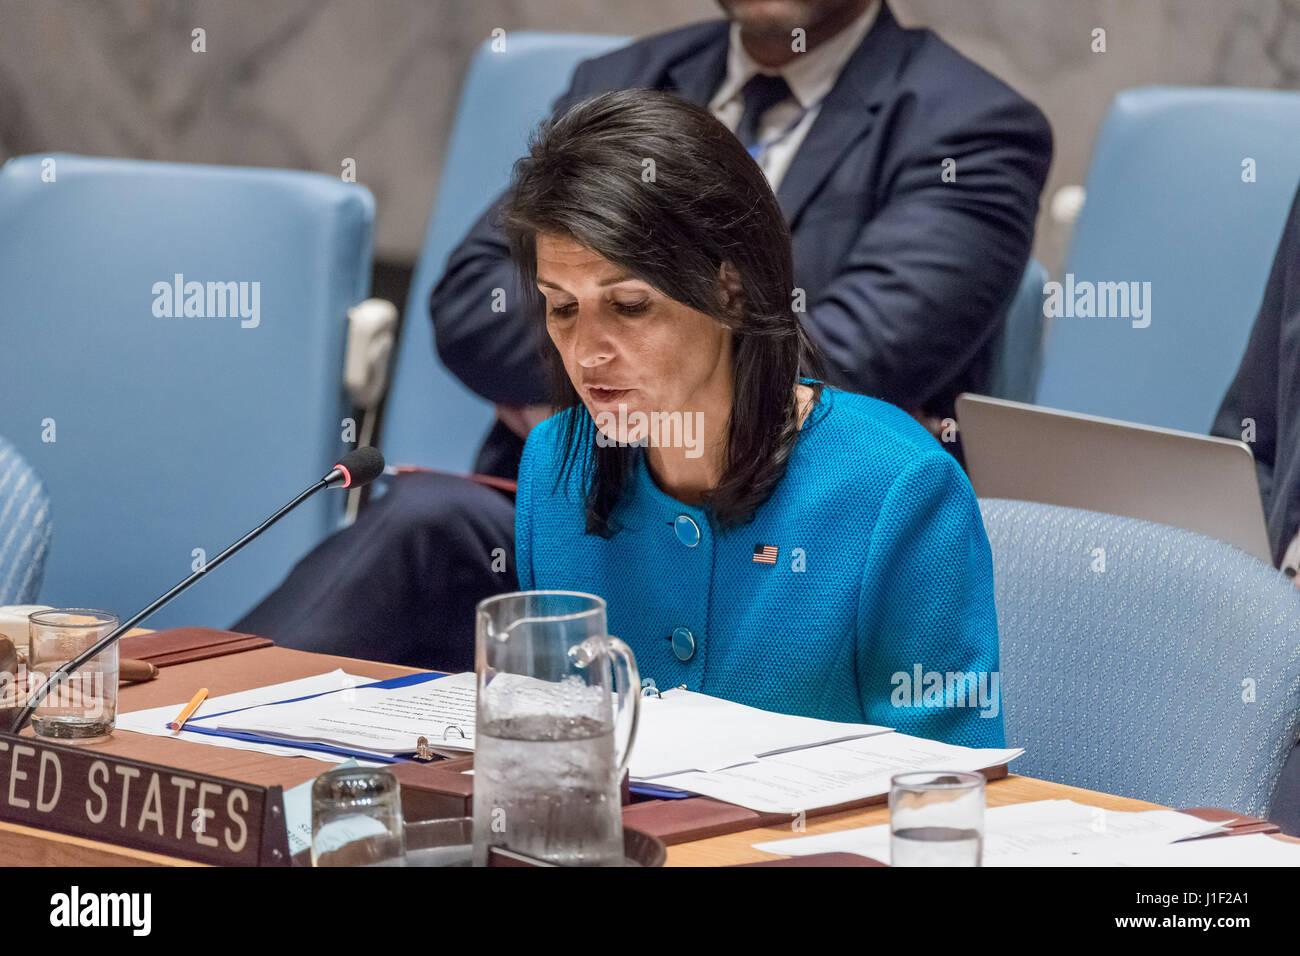 New York, USA. 20th Apr, 2017. US Permanent Representative to the UN Ambassador Nikki Haley is seen offering remarks to the Council in her national capacity. The United Nations Security Council convened an open debate on the 'the situation in the Middle East, including the Palestinian question.” At the debate preside over by US Ambassador to the UN Nikki Haley, Council members heard a briefing from Nikolay Mladenov, the UN Special Coordinator for the Middle East Peace Process. Though monthly meetings on Palestine are a standard item in the Council's programme, upon assuming Presidency of the C Stock Photo